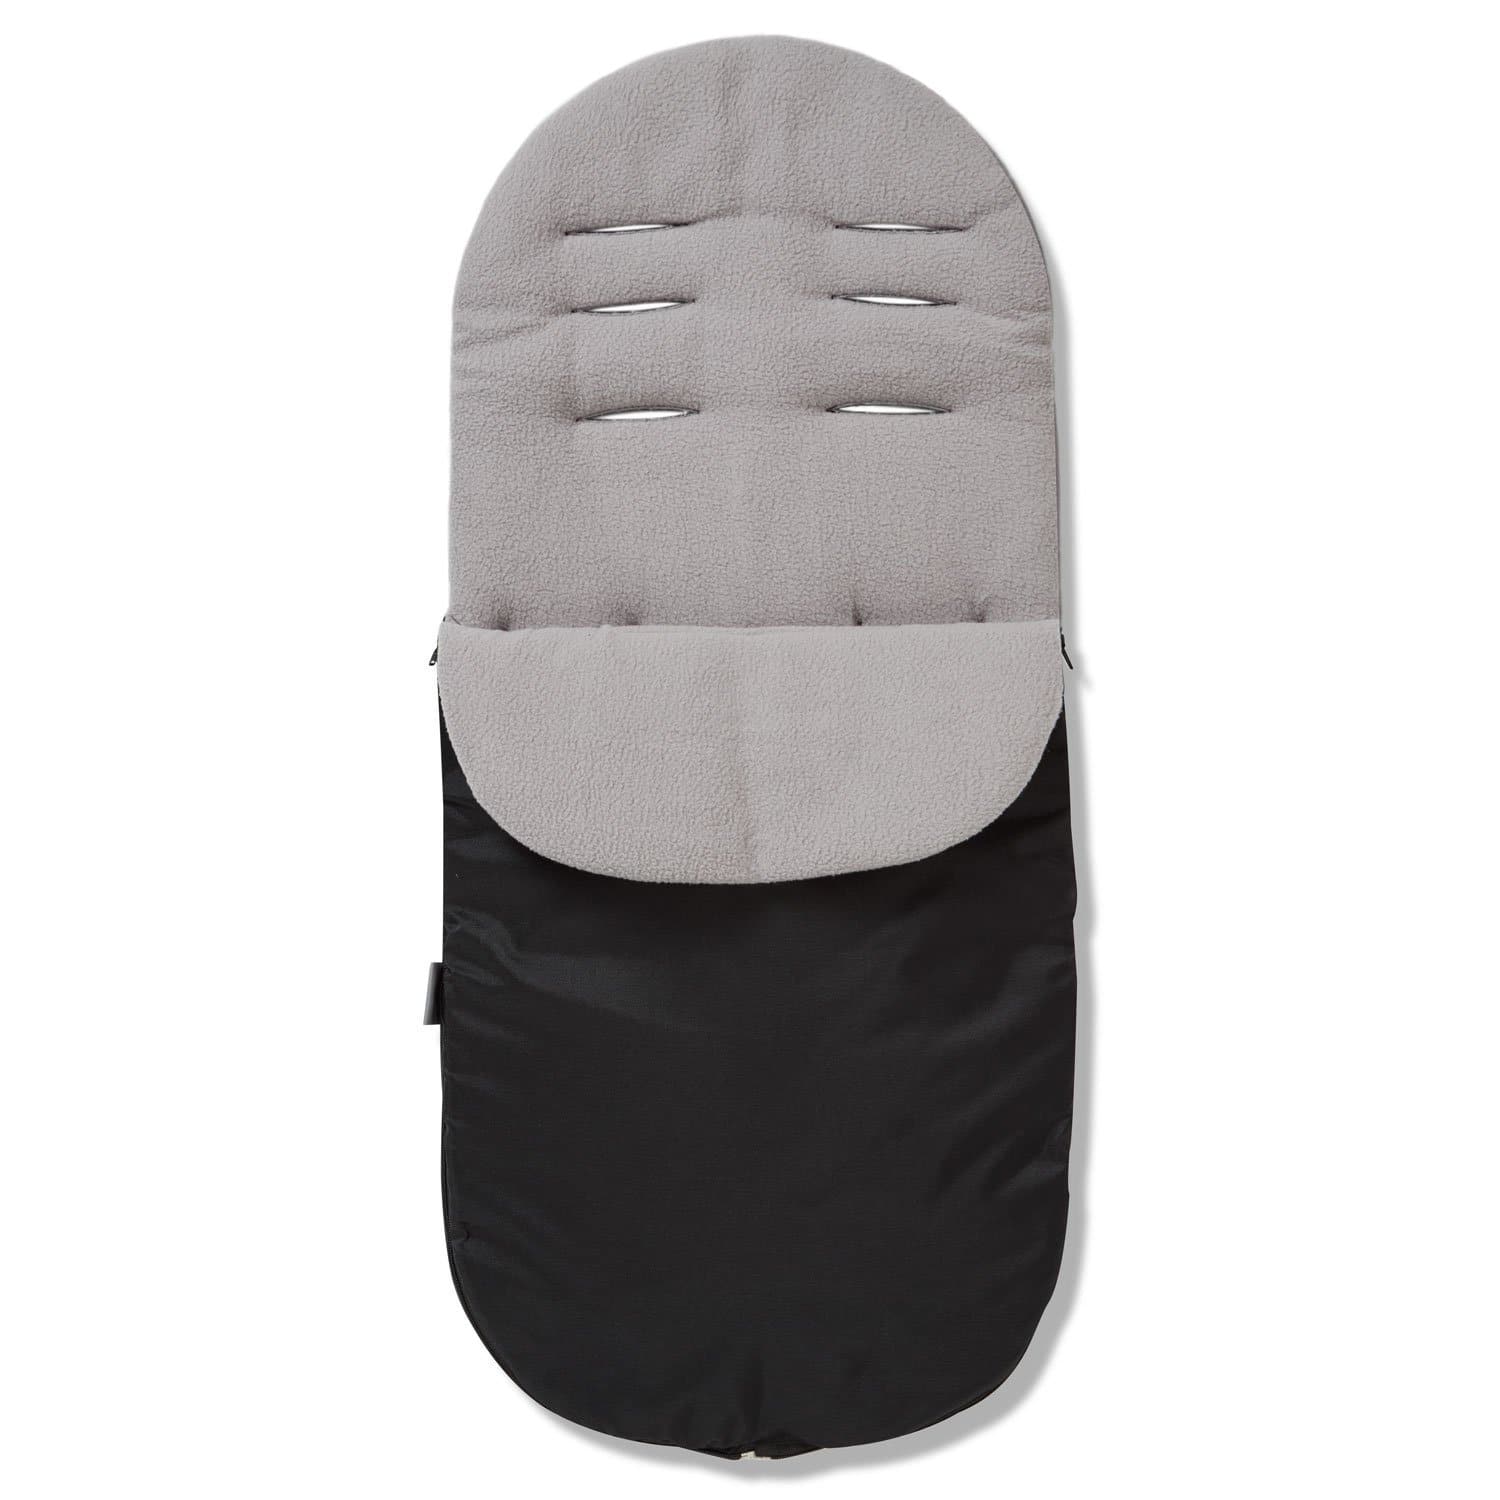 Footmuff / Cosy Toes Compatible with Mamas & Papas - For Your Little One